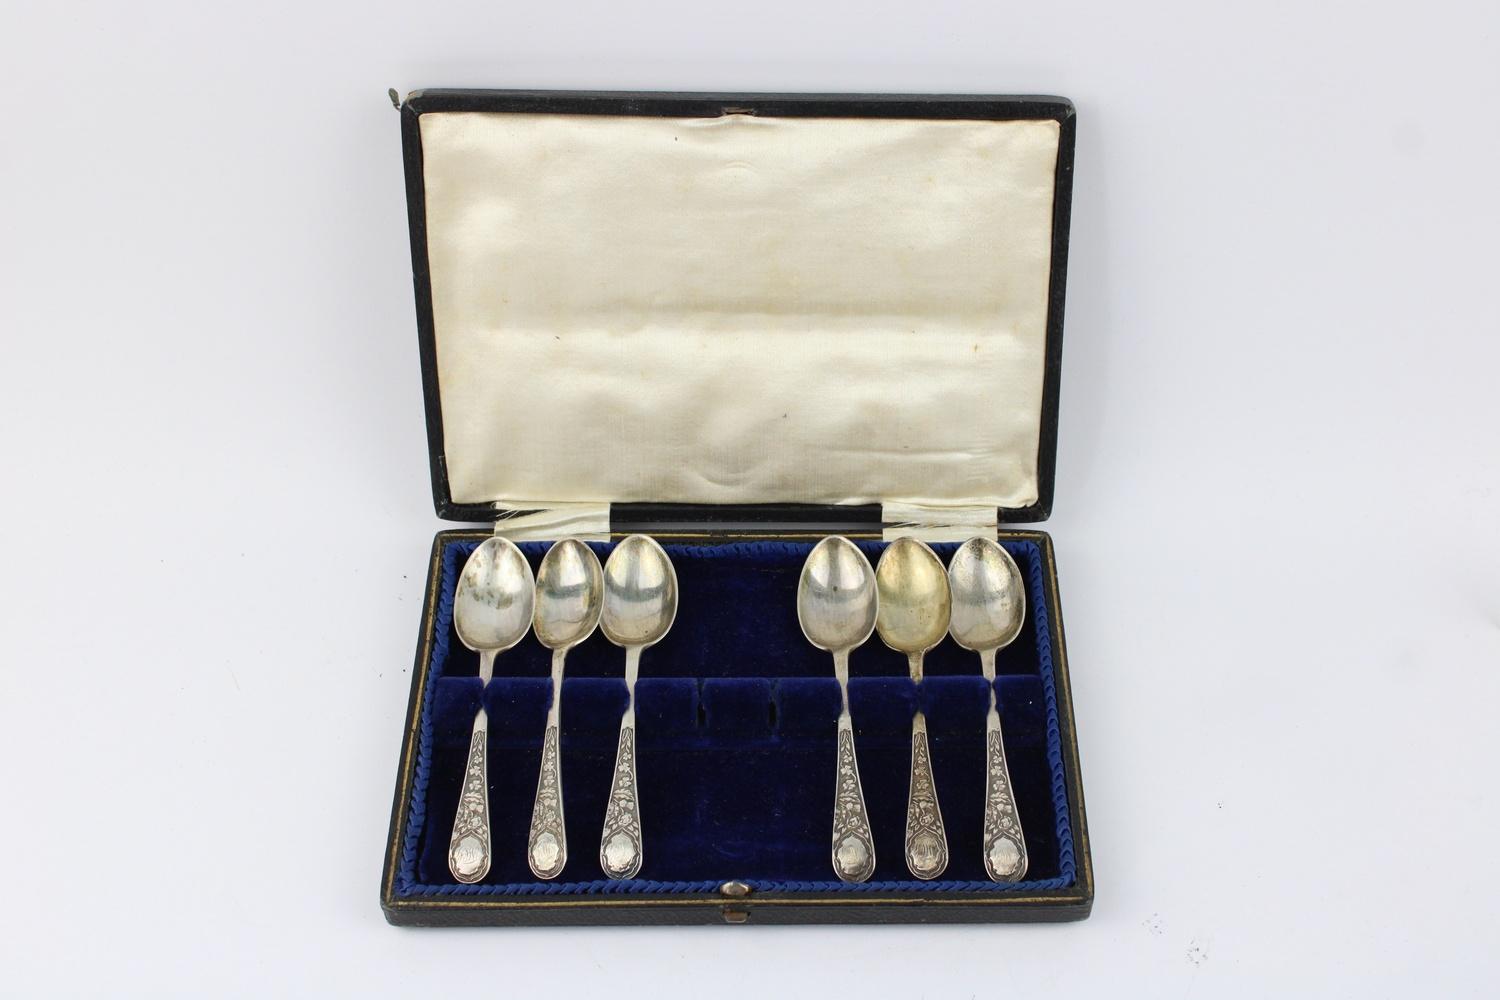 Antique Hallmarked 1906 Sheffield silver teaspoons with associated cased Maker - W S Savage & Co